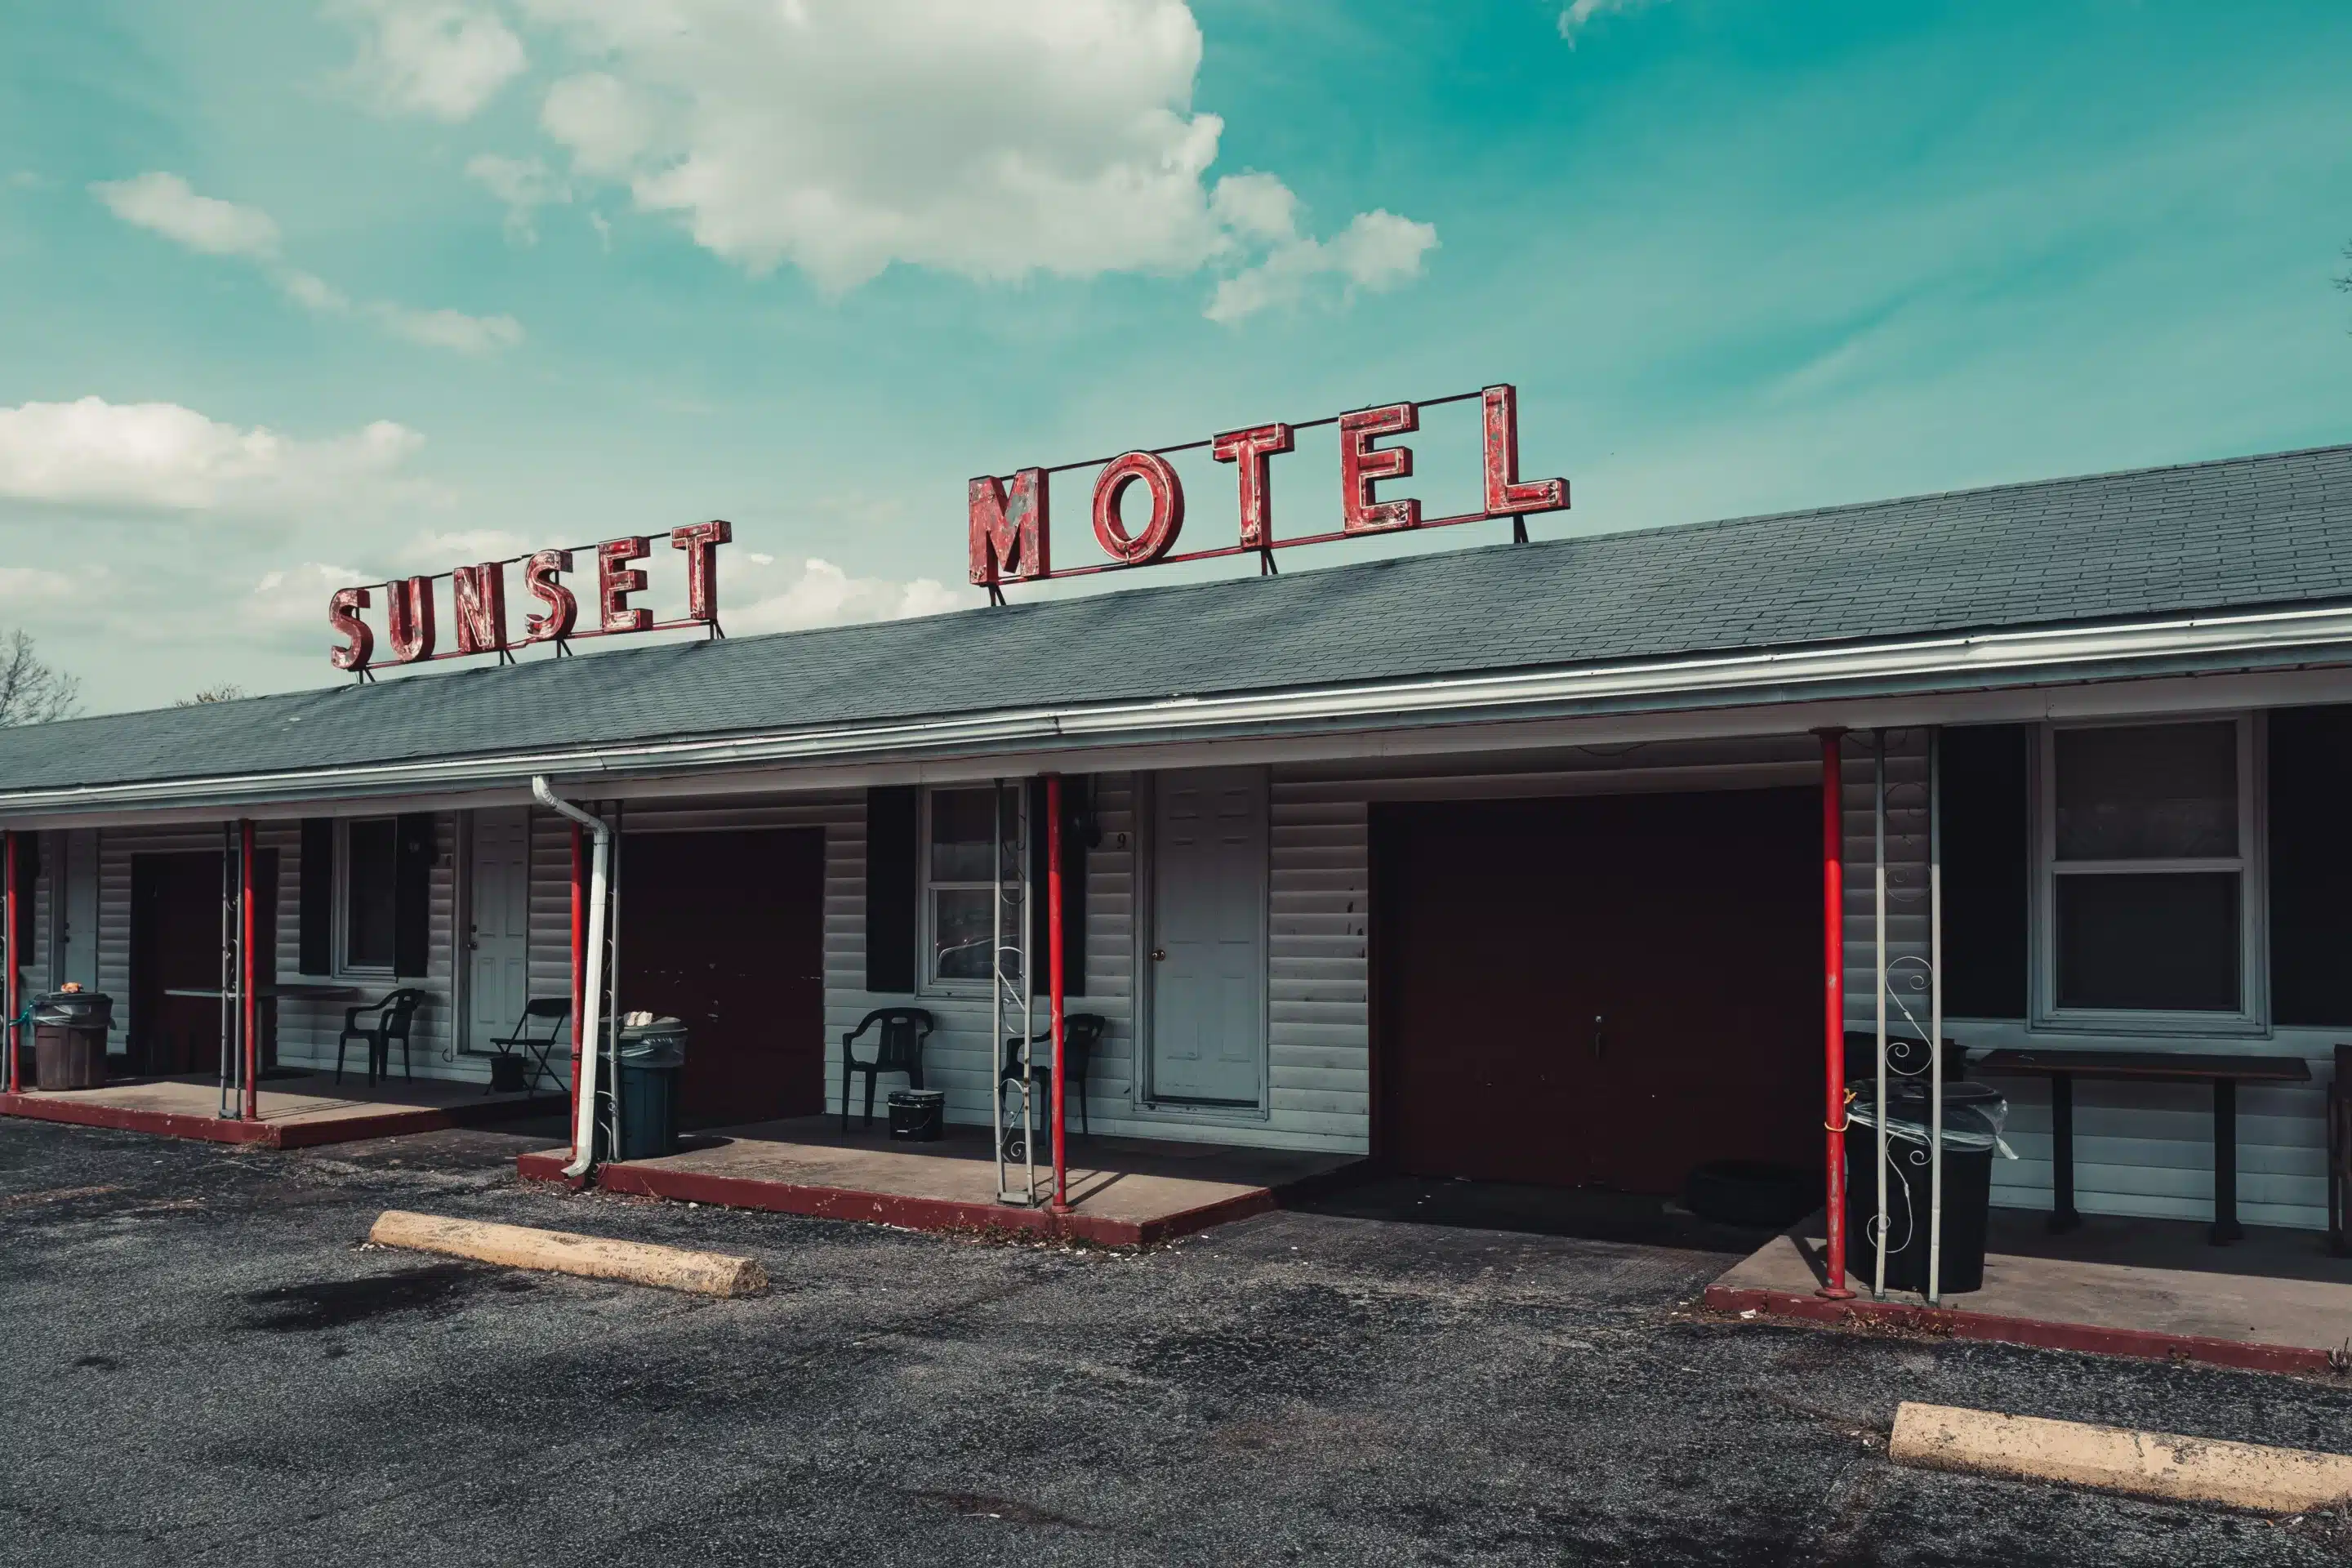 A sketchy motel. This is an example of why car camping is better.